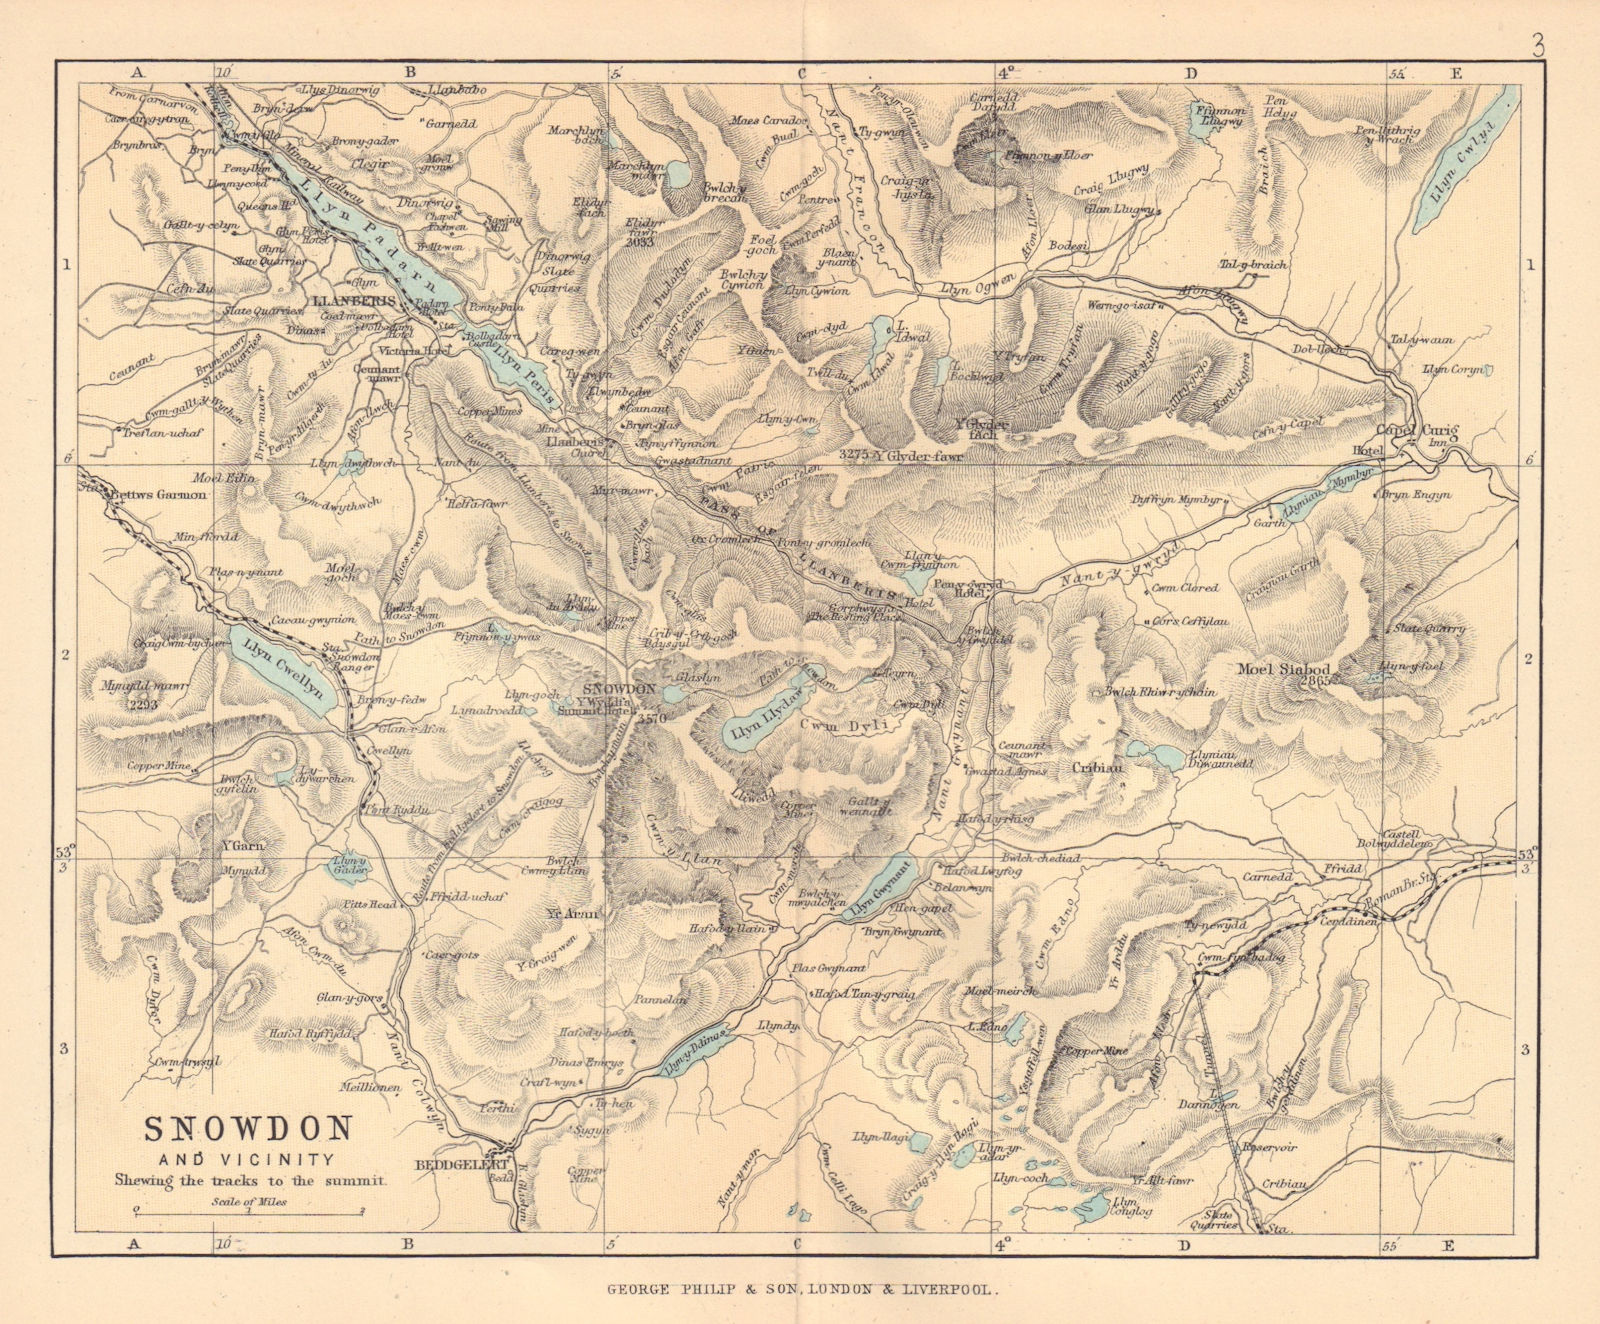 Associate Product SNOWDONIA Snowdon showing tracks to the Summit Wales BARTHOLOMEW 1885 old map